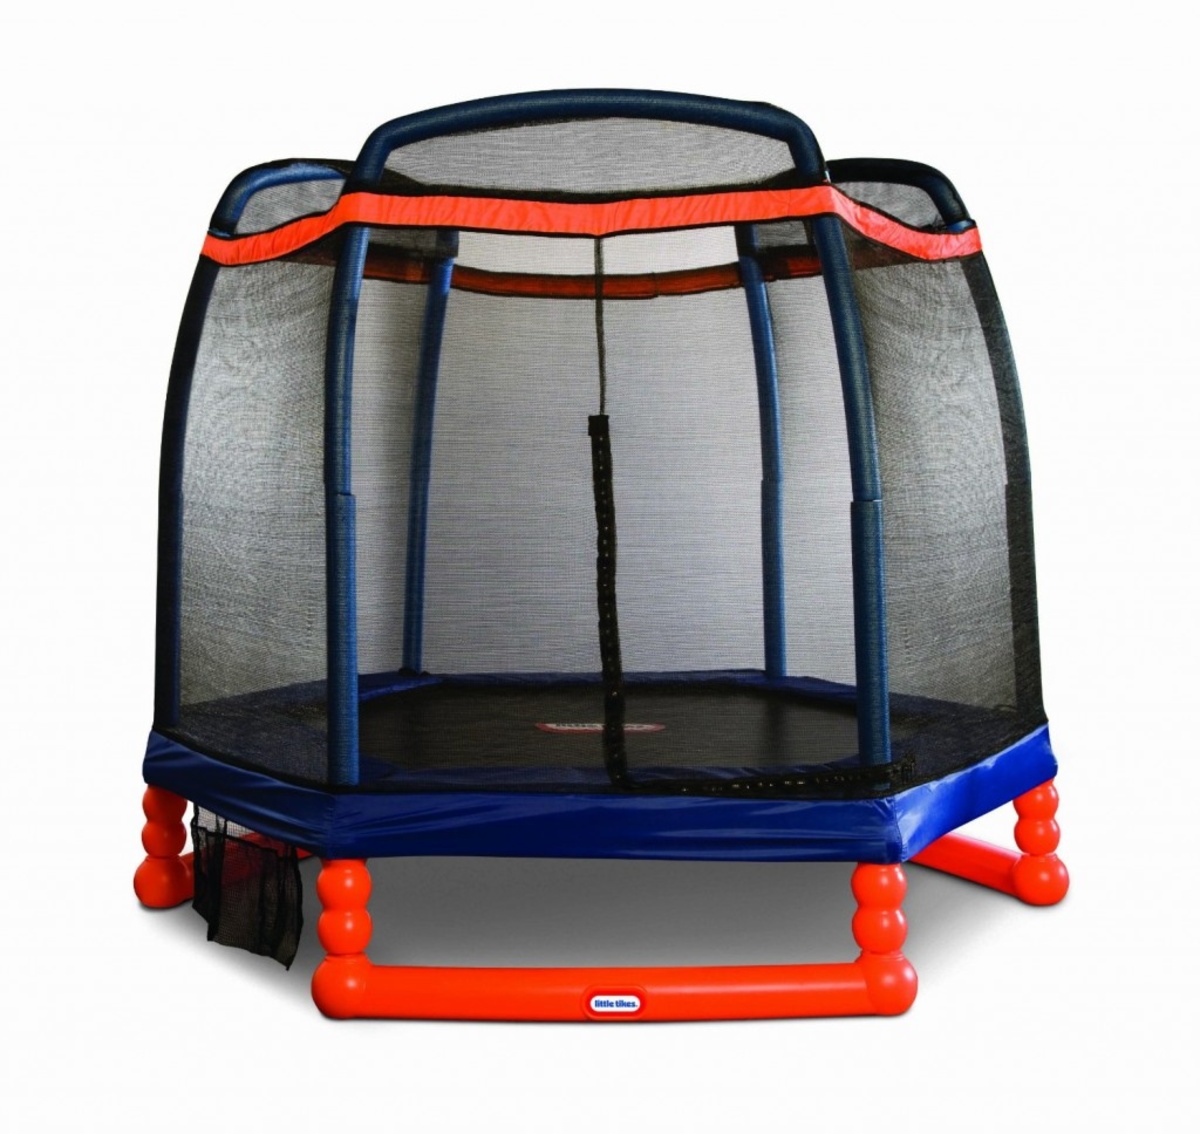 What Is The Weight Limit On A Little Tikes Trampoline